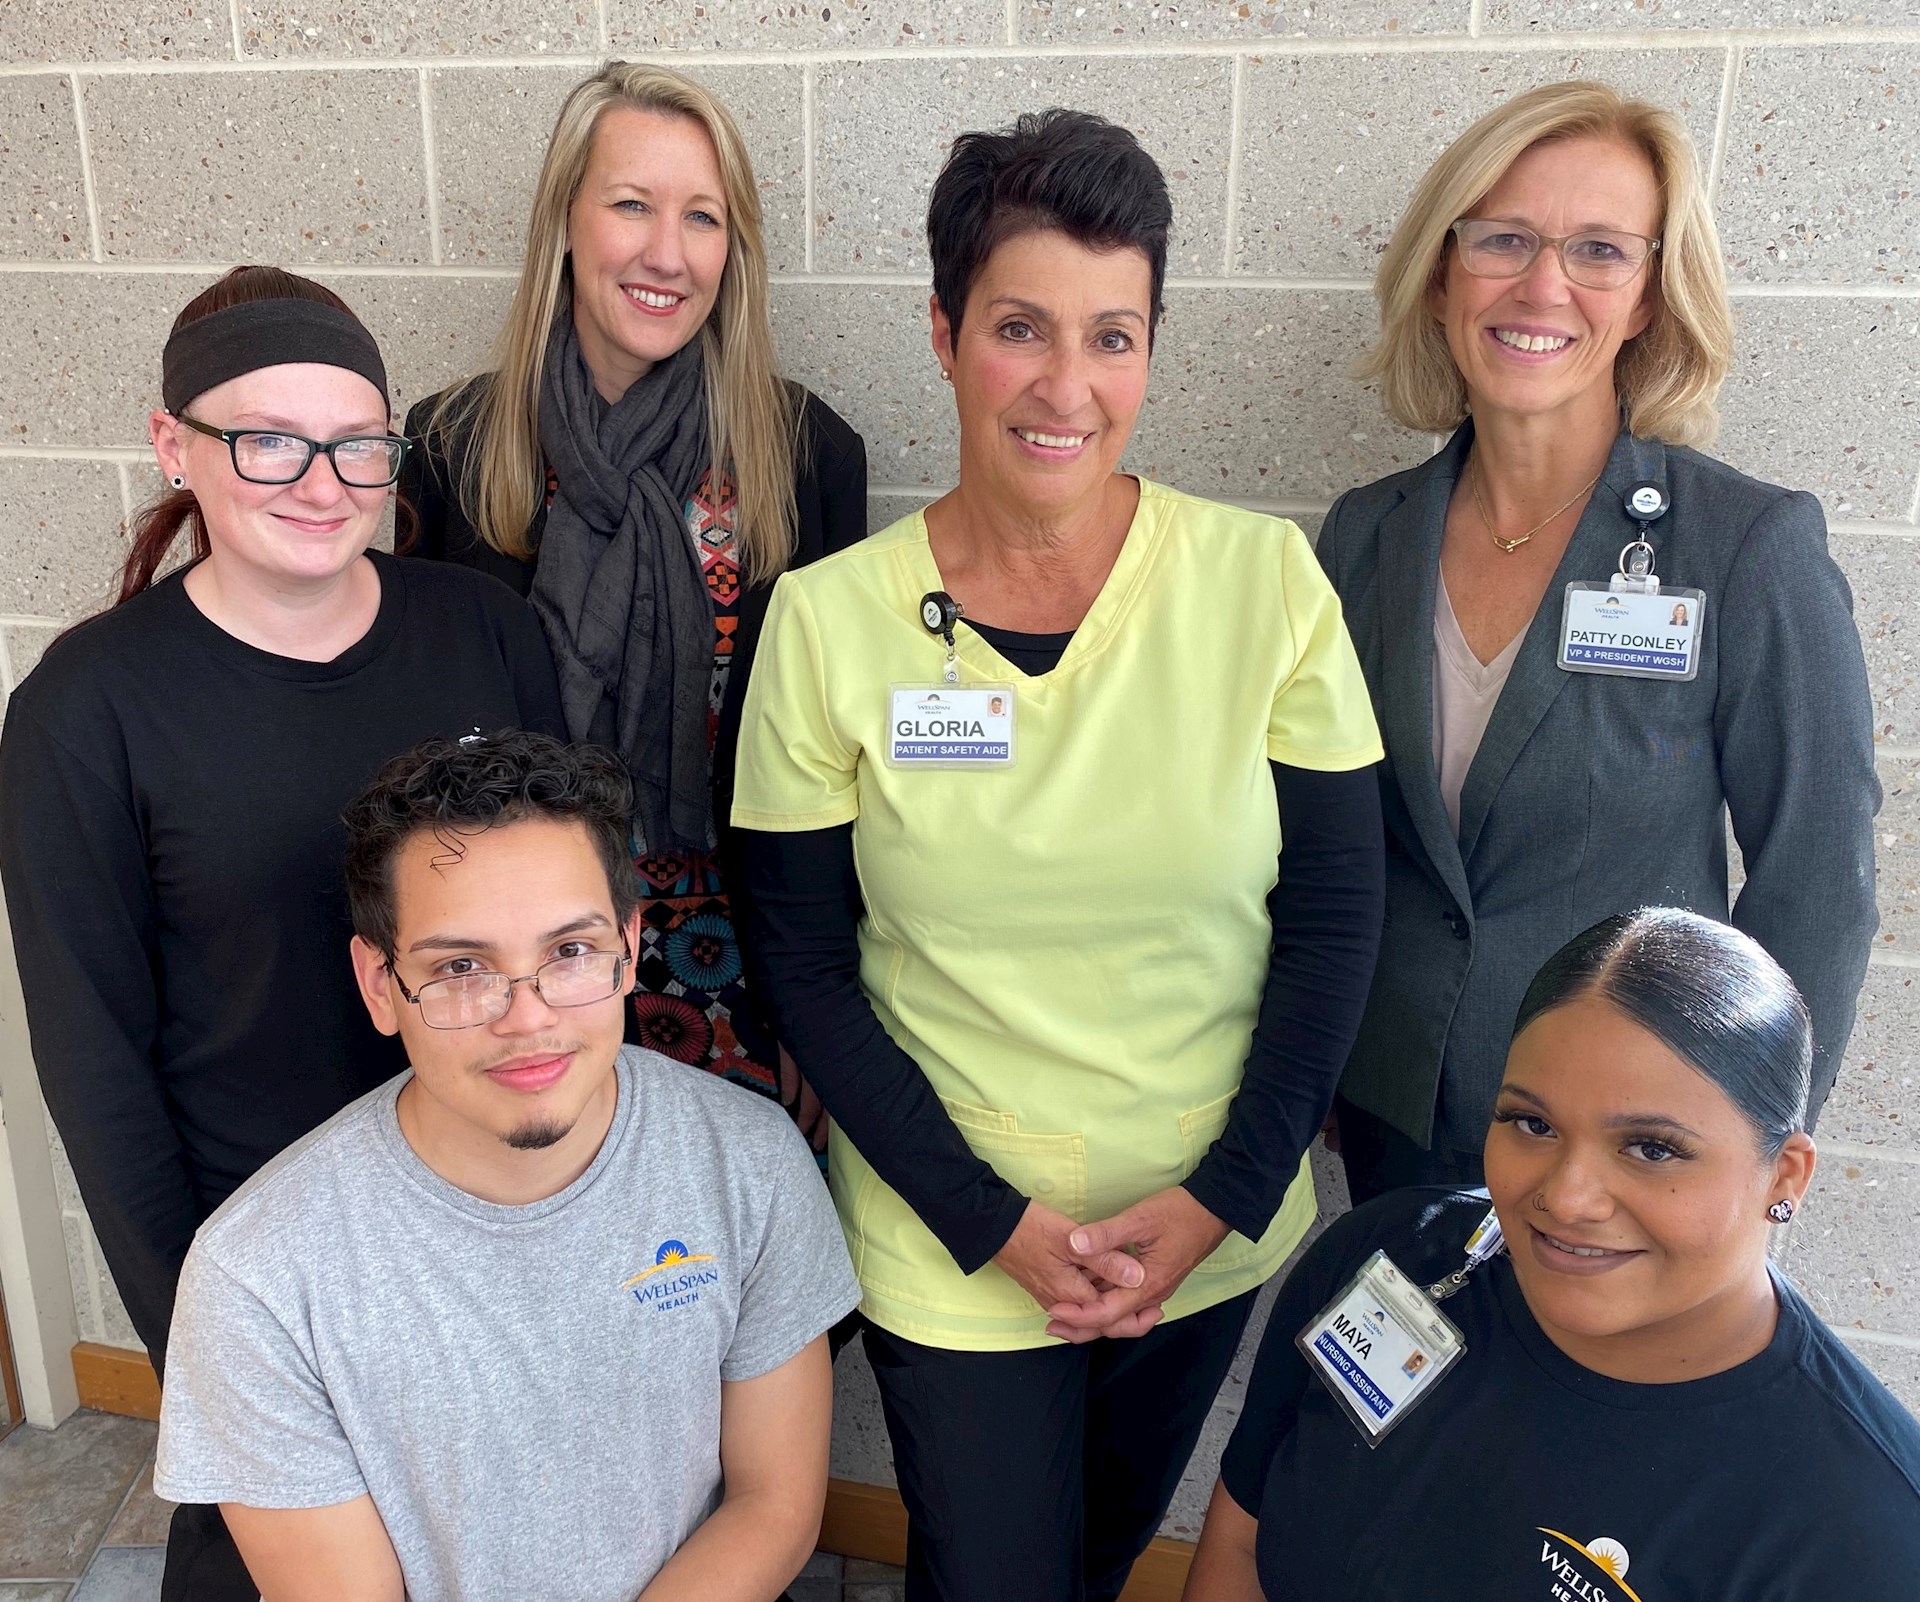 Gloria Tice (center) surrounded by her former students who work at WellSpan (clockwise, from lower left) Cristhian Torrez, Samantha Boyer, Dr. Rhian Davies, Patty Donley, and Mayalani Bracero.